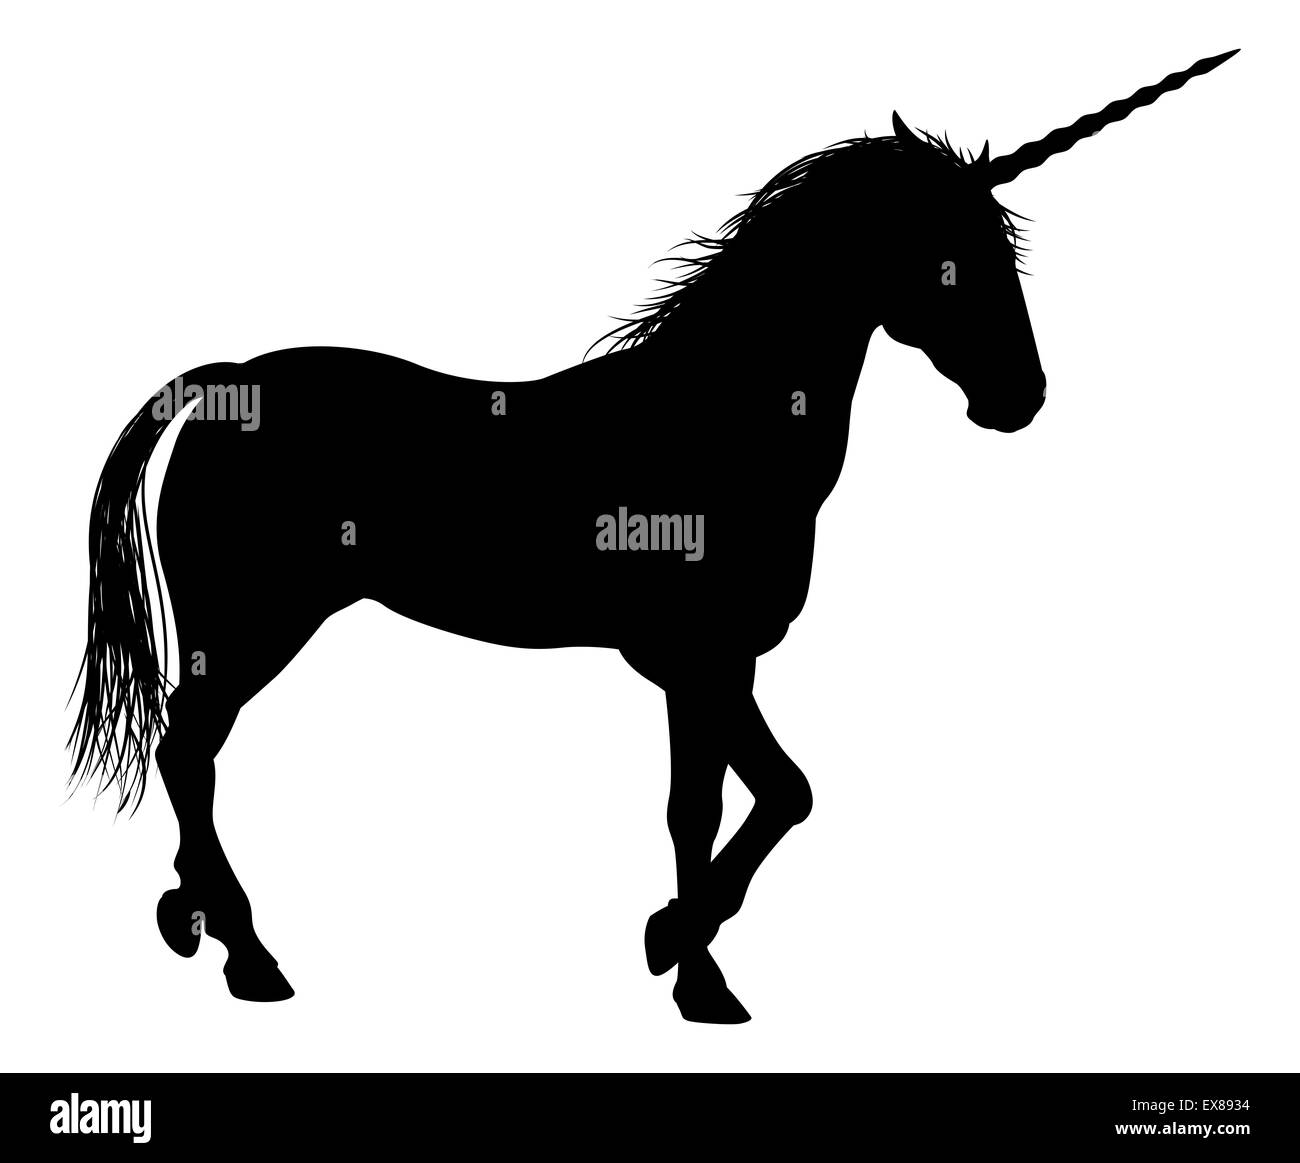 Unicorn mythical horse in silhouette Stock Photo